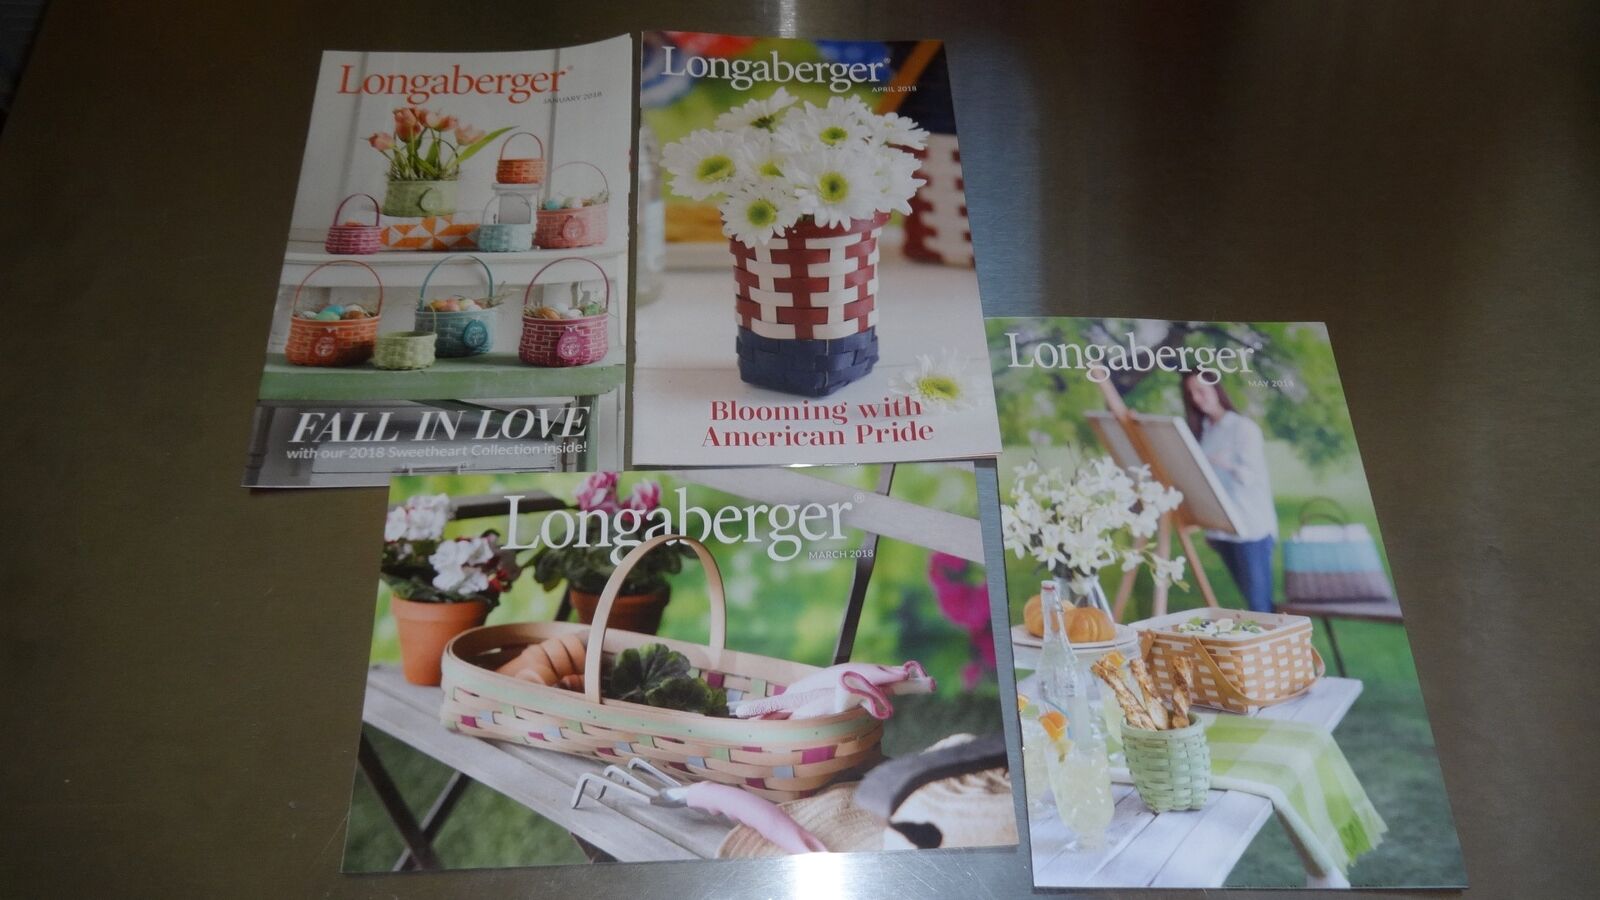 Longaberger VERY LAST 4 Longaberger Flyers EVER for 2018 before they closed.